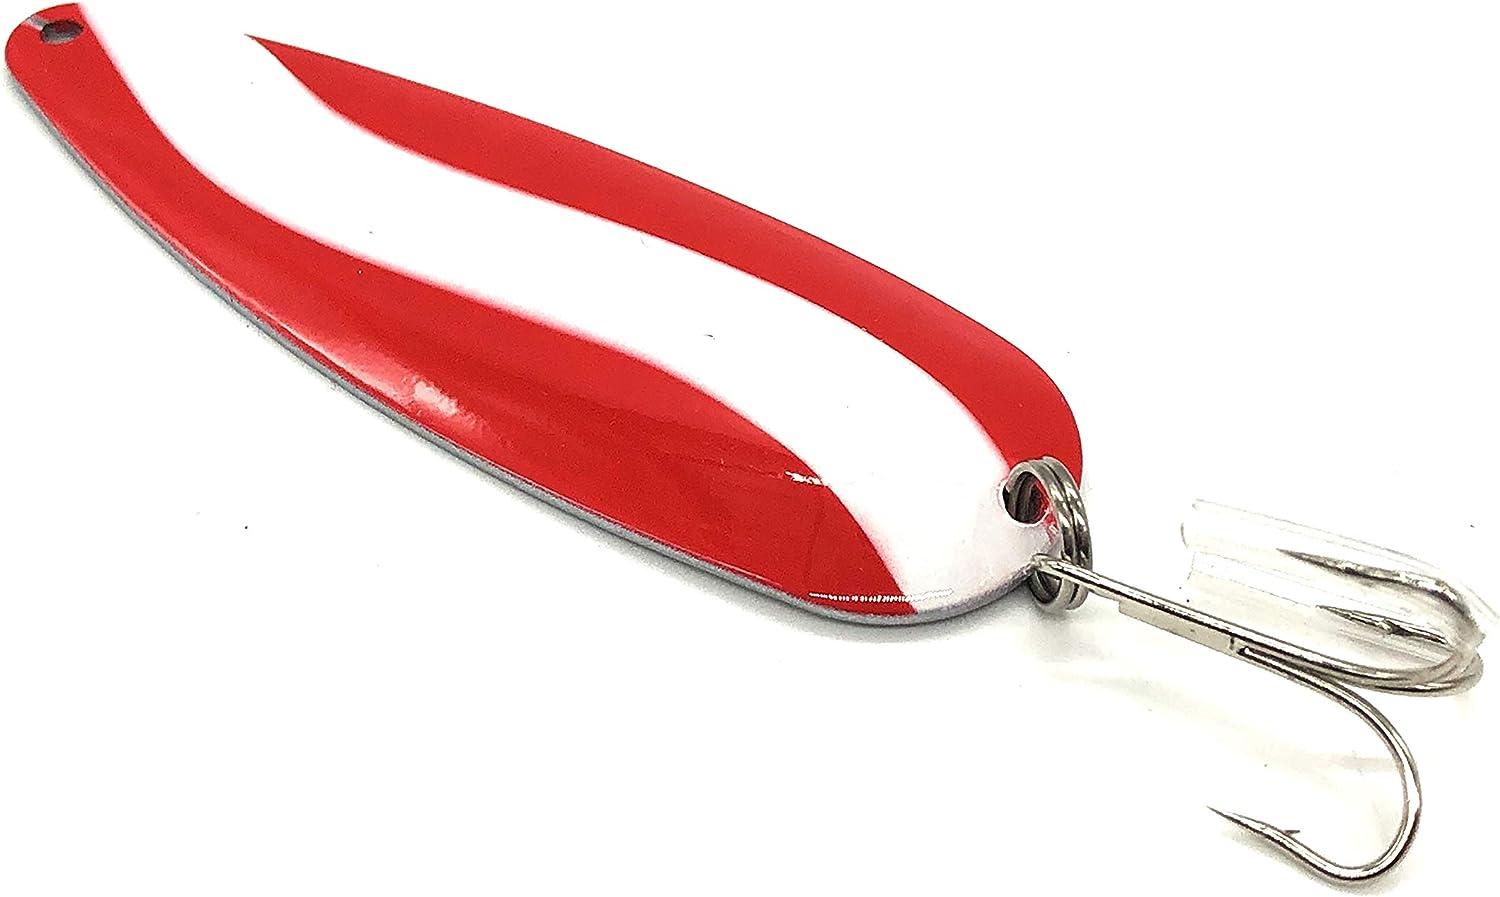 Klima Red & White Spoon with Treble Metal Hooks for Casting